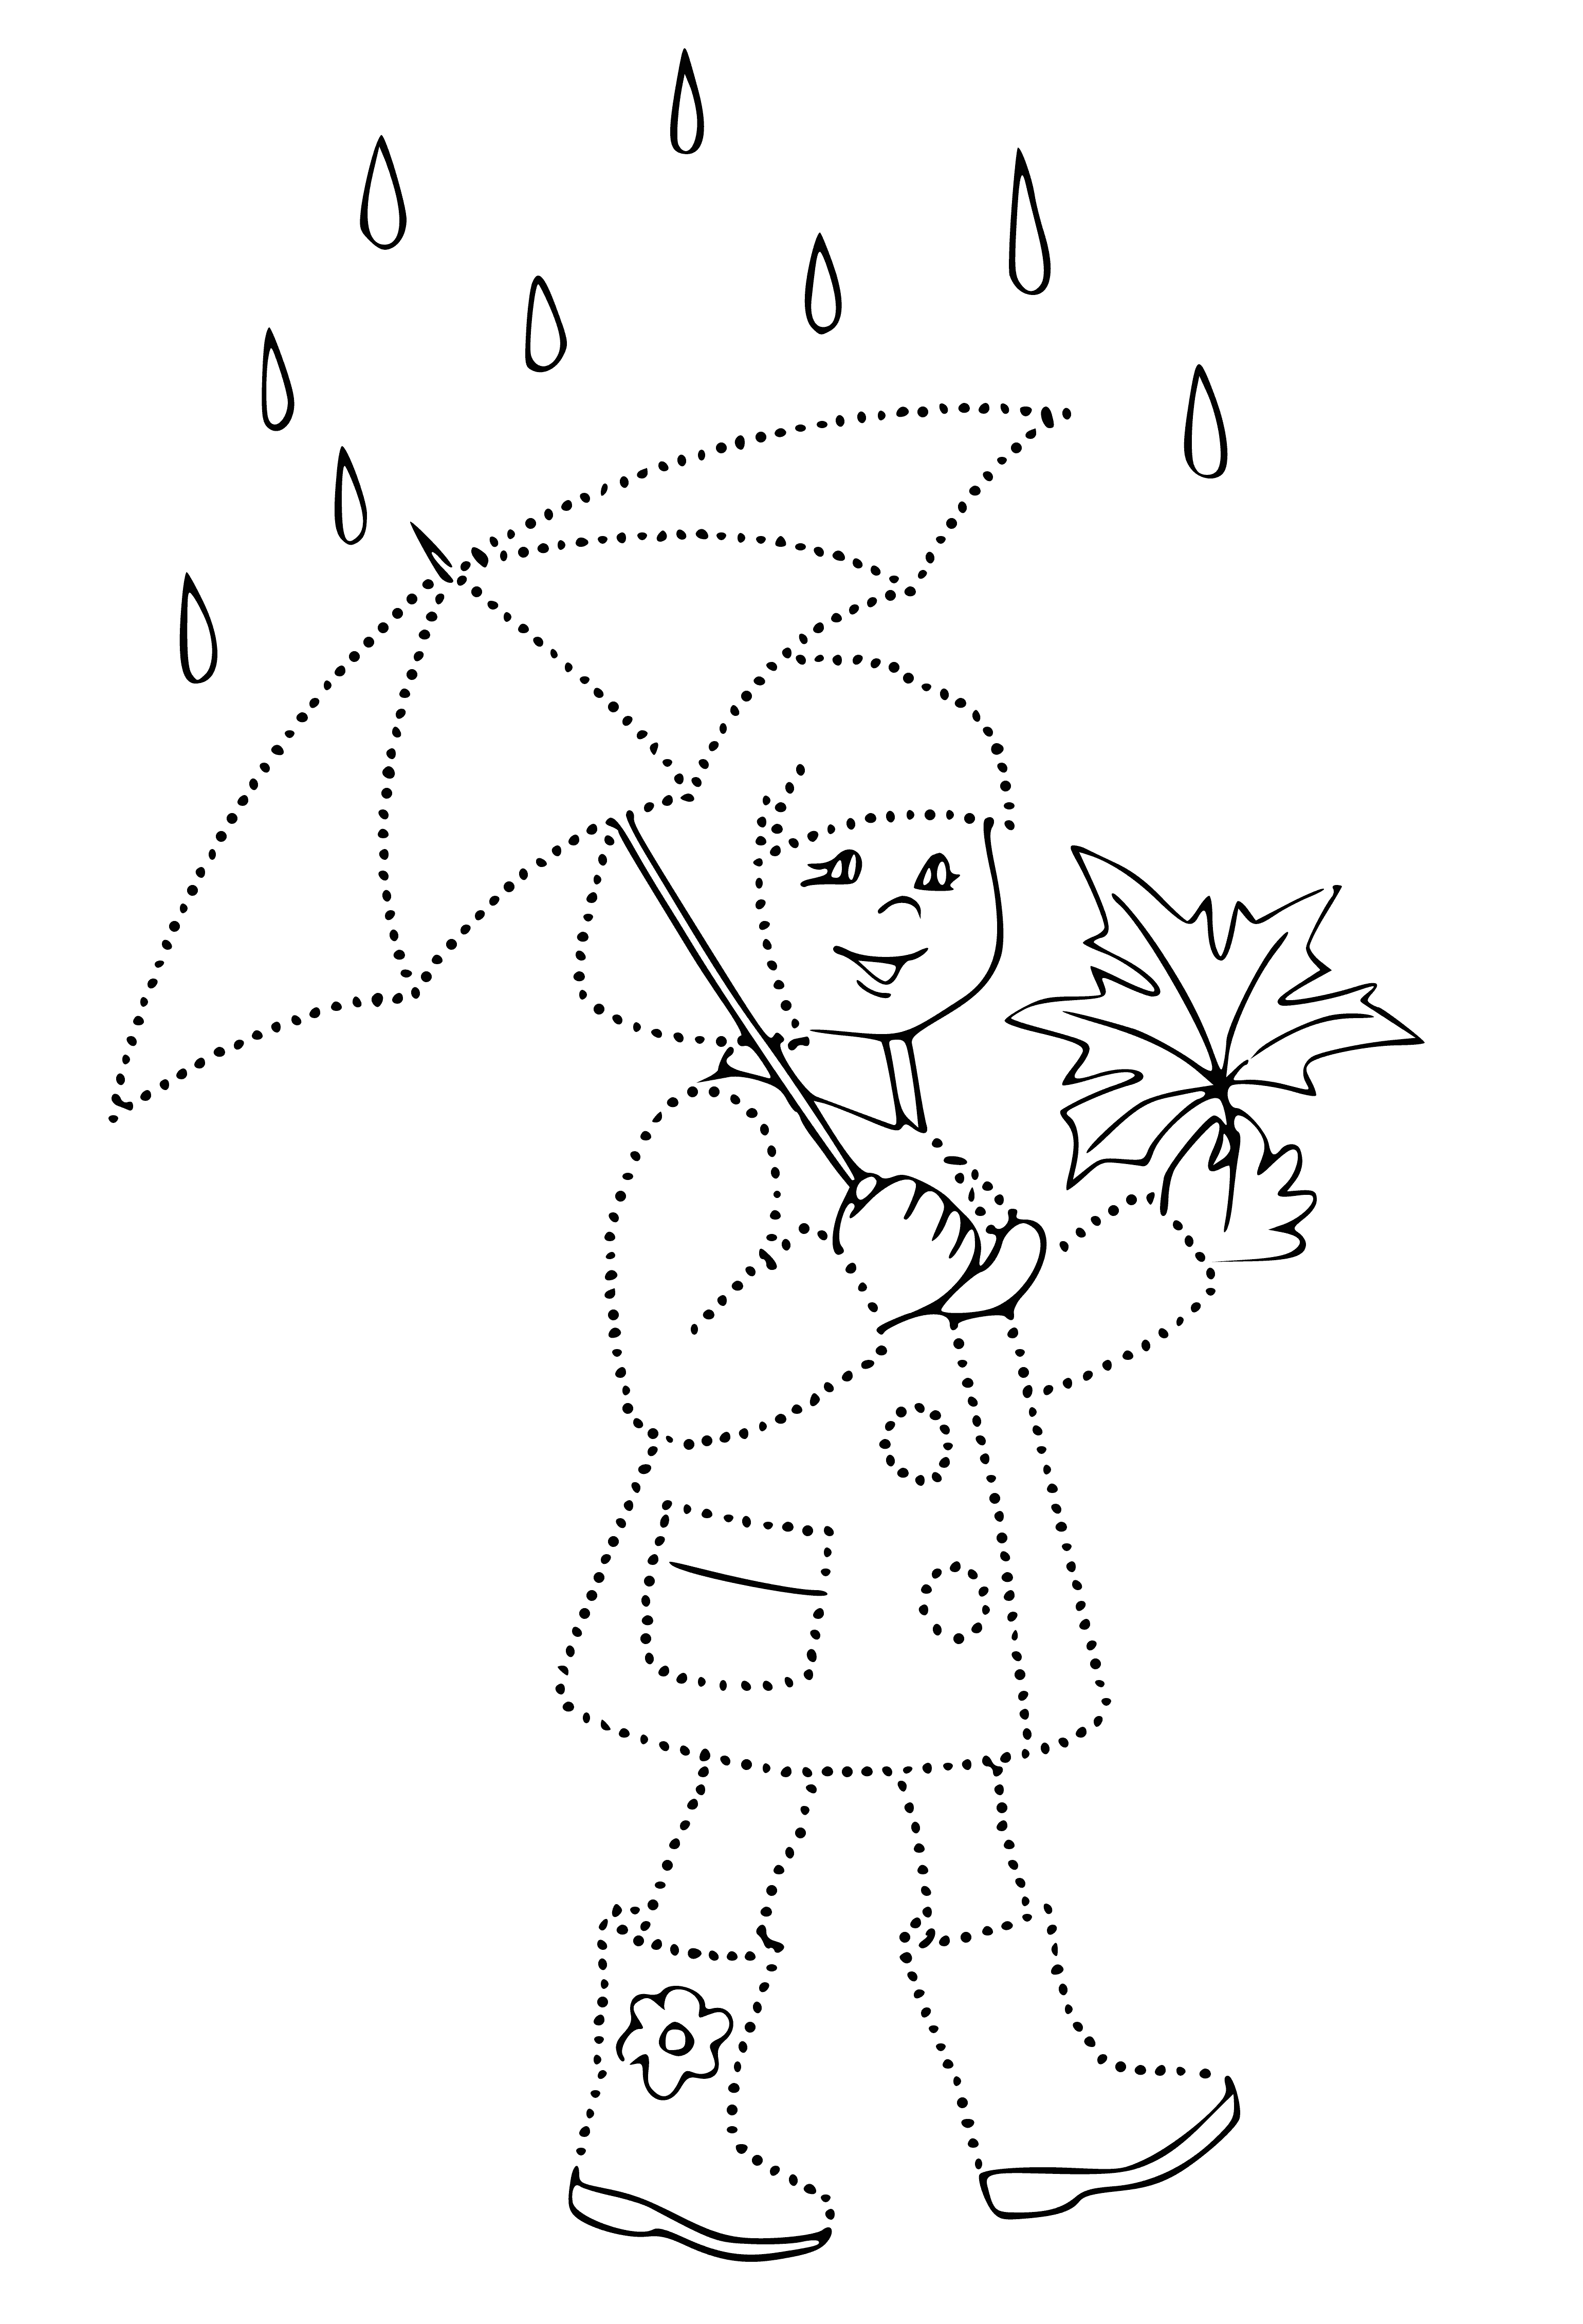 coloring page: Girl stands under red/orange umbrella holding a rake. Behind her is colorful tree, leaves litter ground.